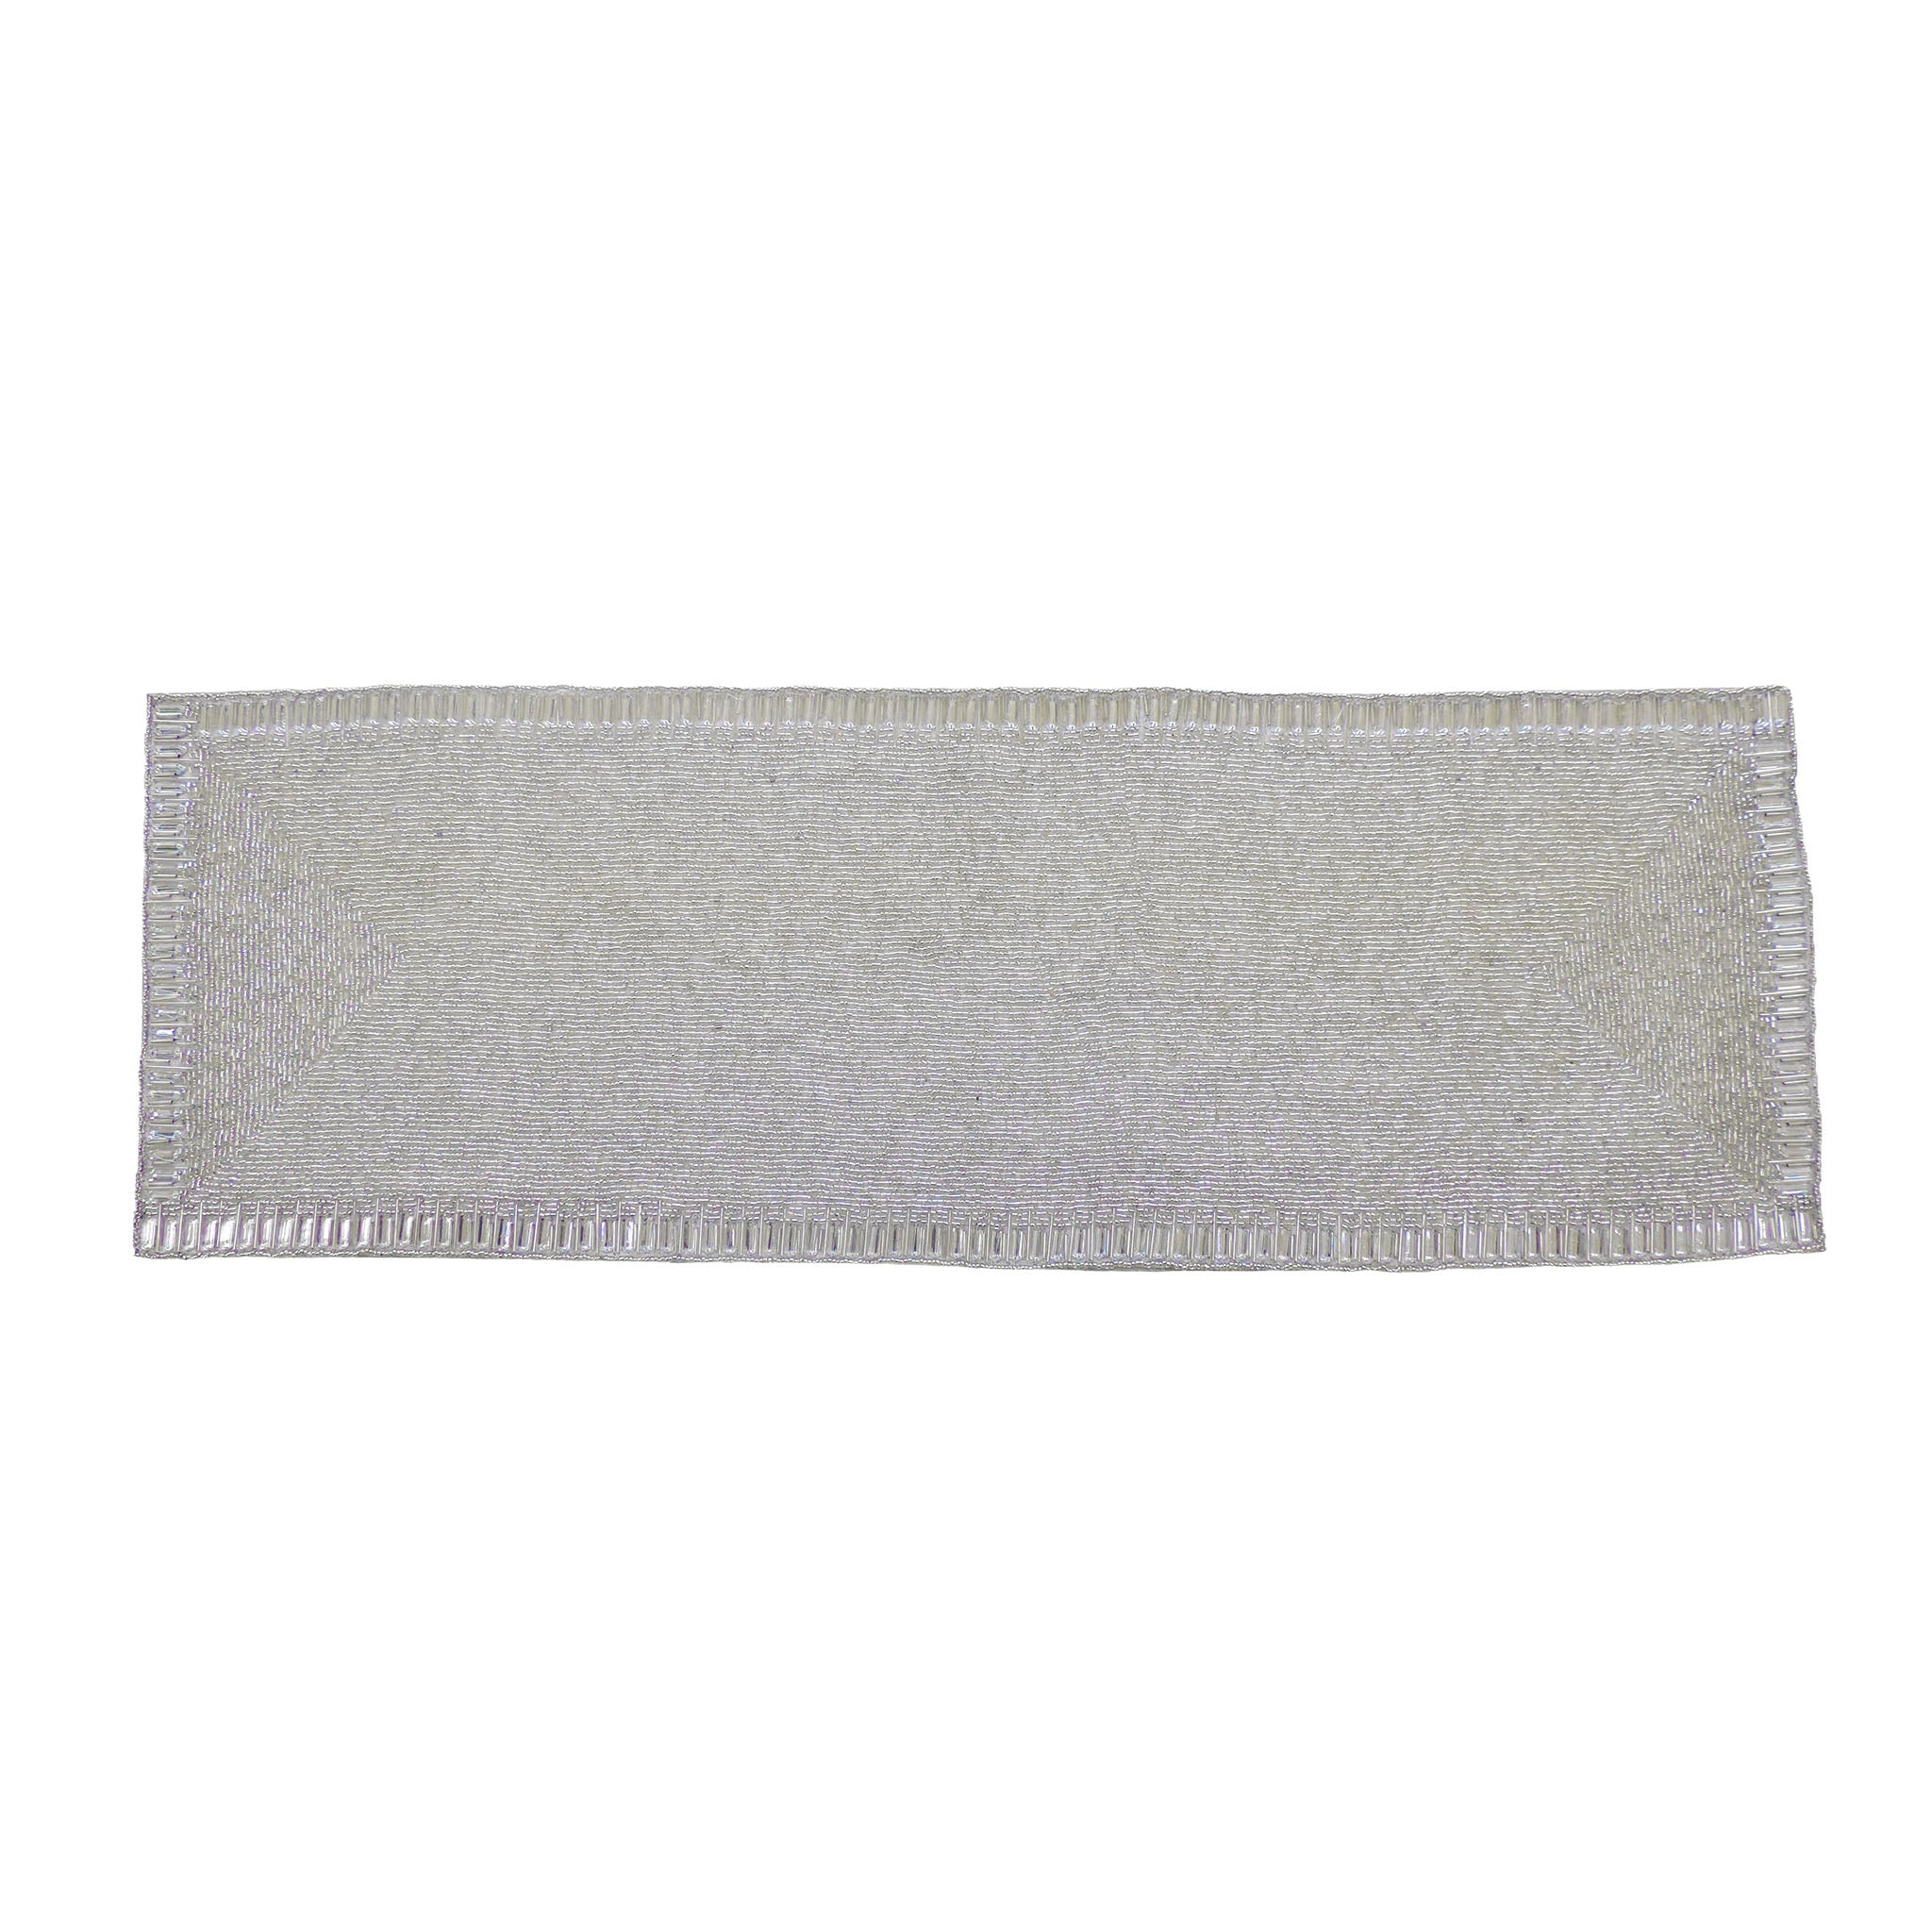 Glam Crystal Bead Embroidered Table Runner in Cream Silver